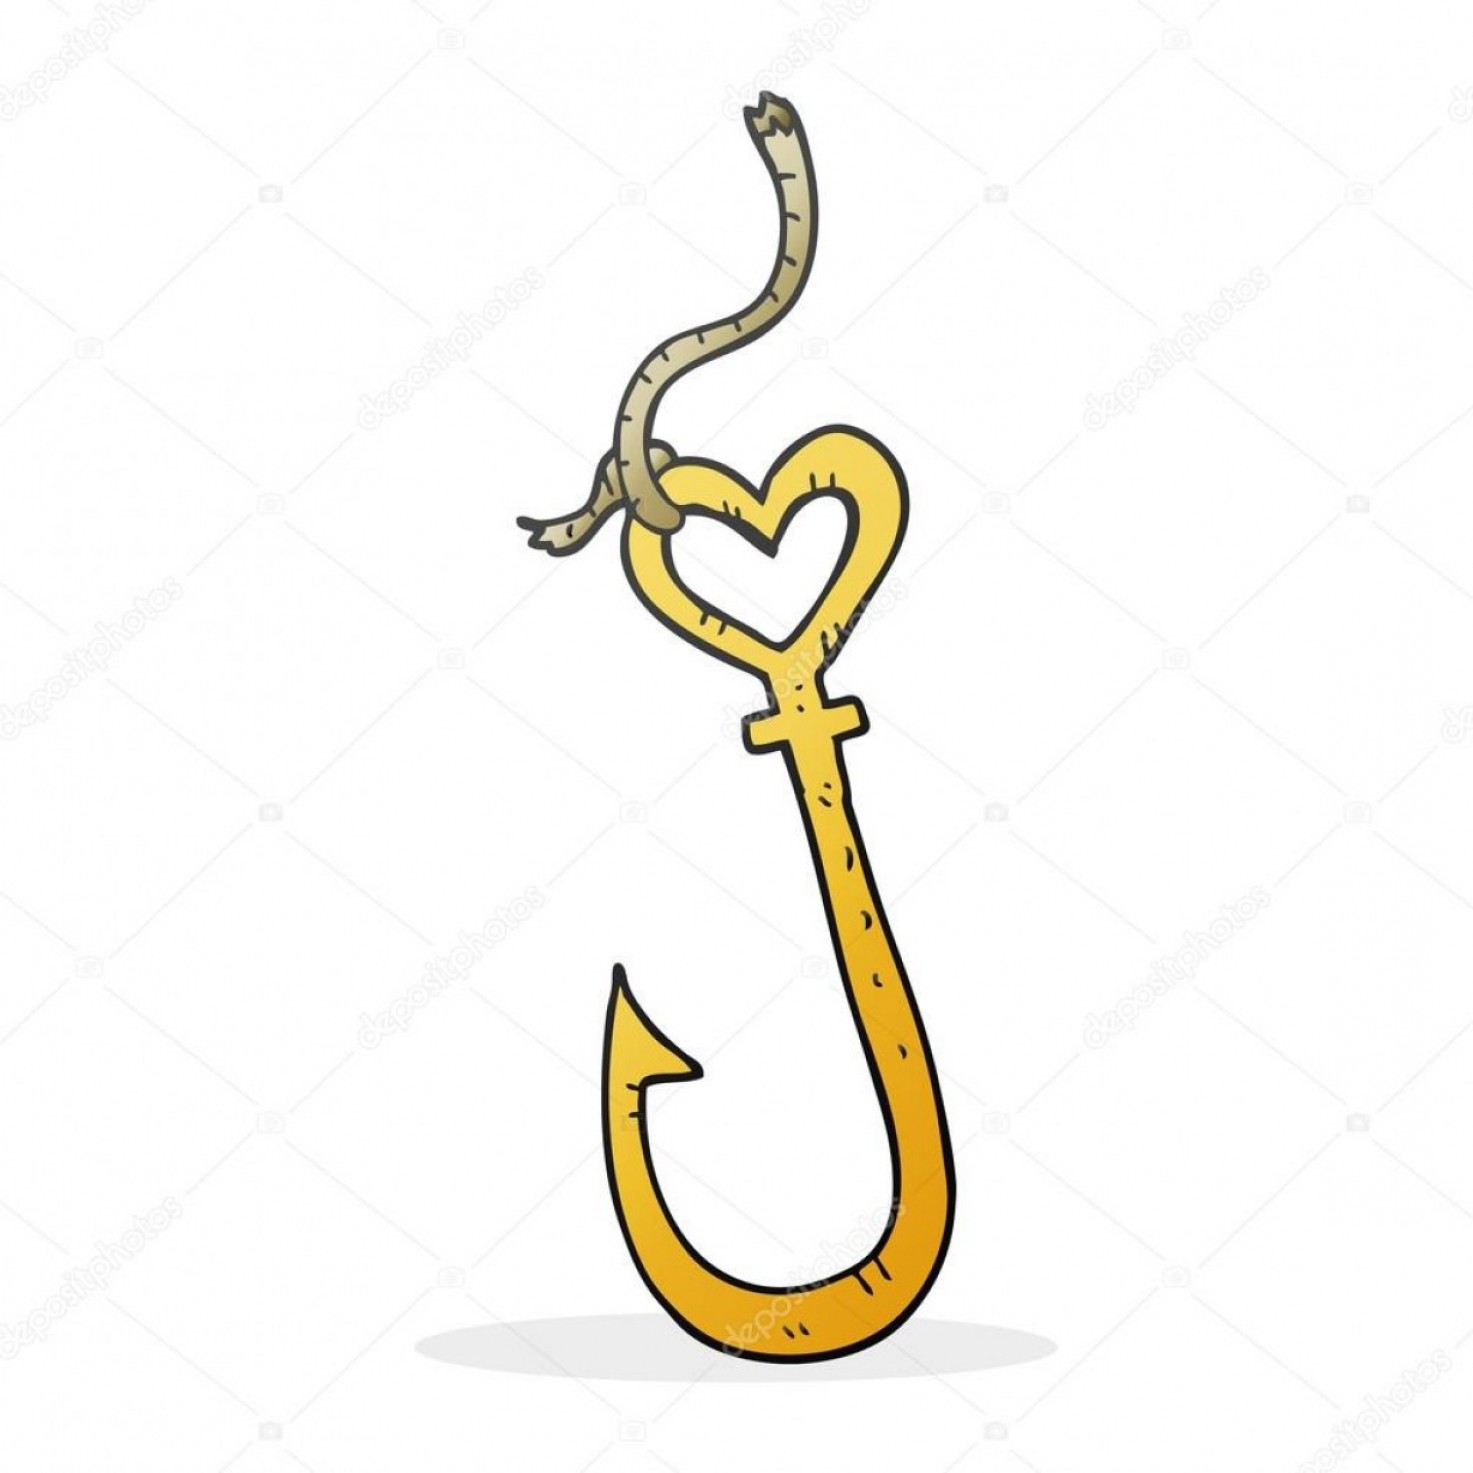 Download Fishing Hook Vector at Vectorified.com | Collection of ...